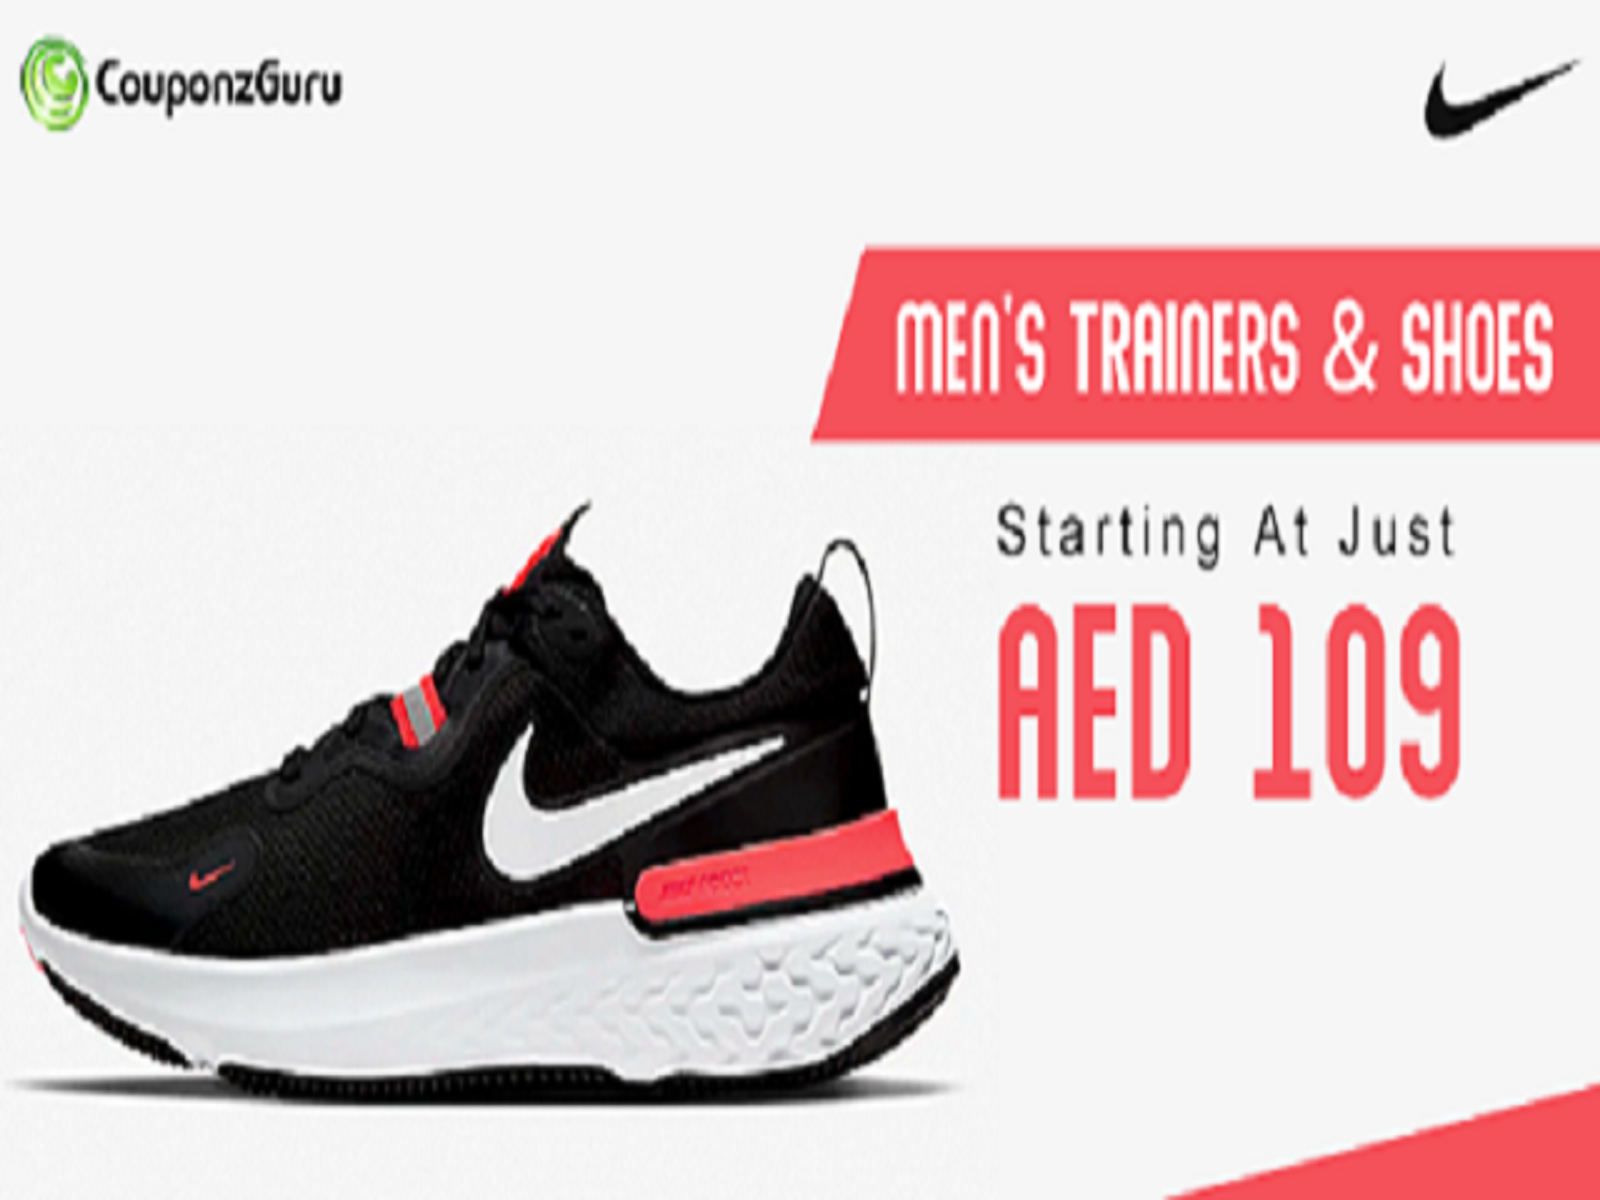 Nike Voucher Codes and Promotional Offers by joseph on Dribbble